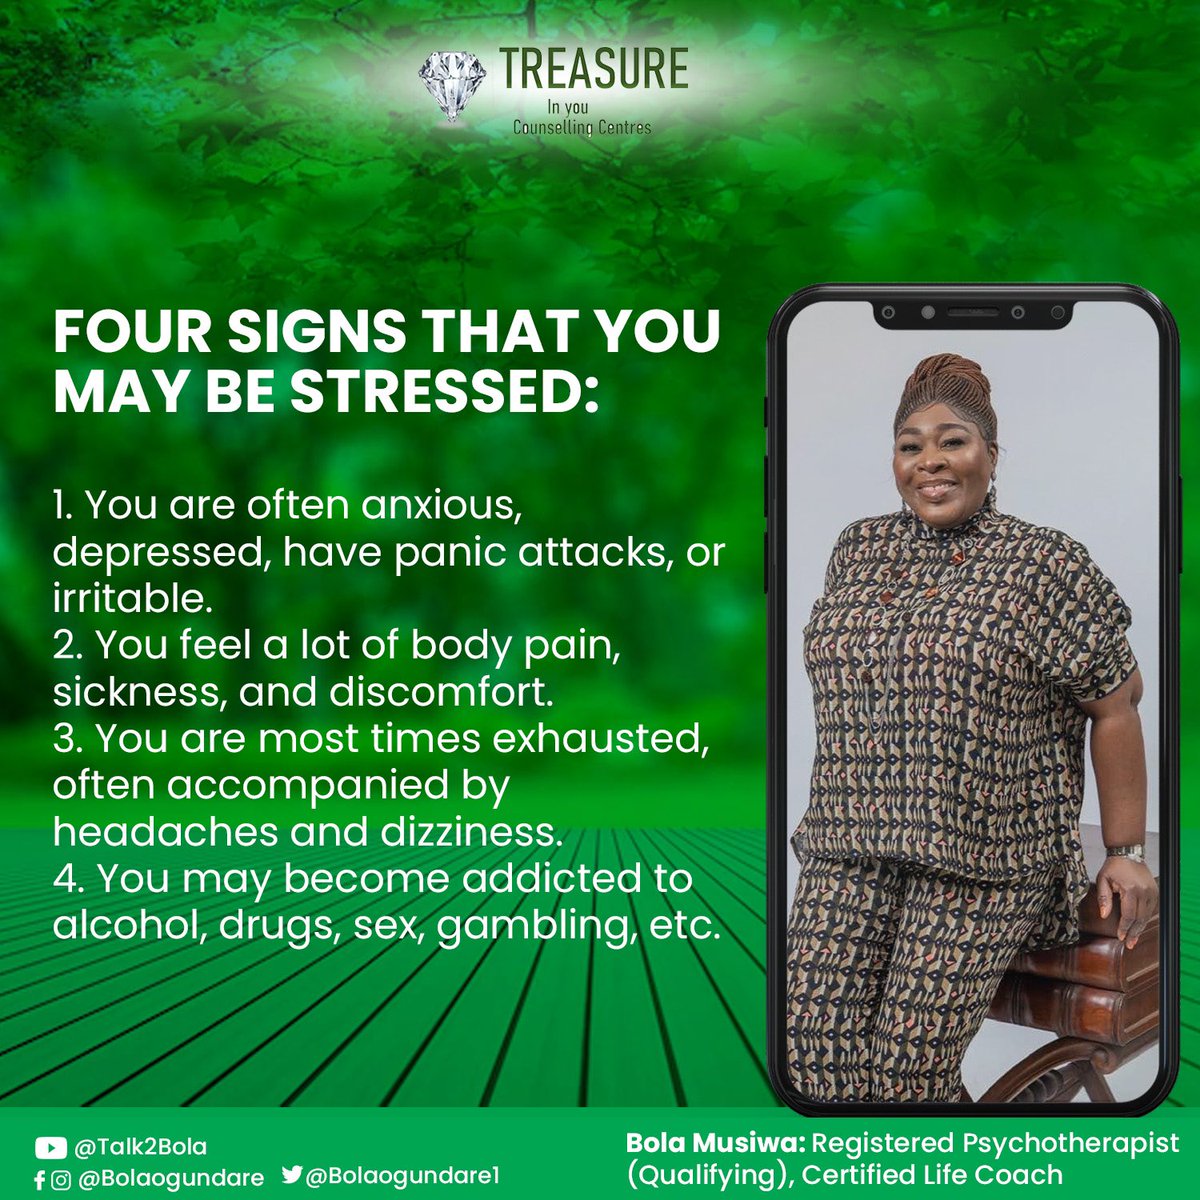 Are you dealing with stress? Then try these tips consistently. 

#BolaOgundare #TreasureInYouCounselling #Stressless #Stressrelieving #Stresslevel  #Stressful #Stresscoach #Stressmanagementcoach #Stresslesslivemore